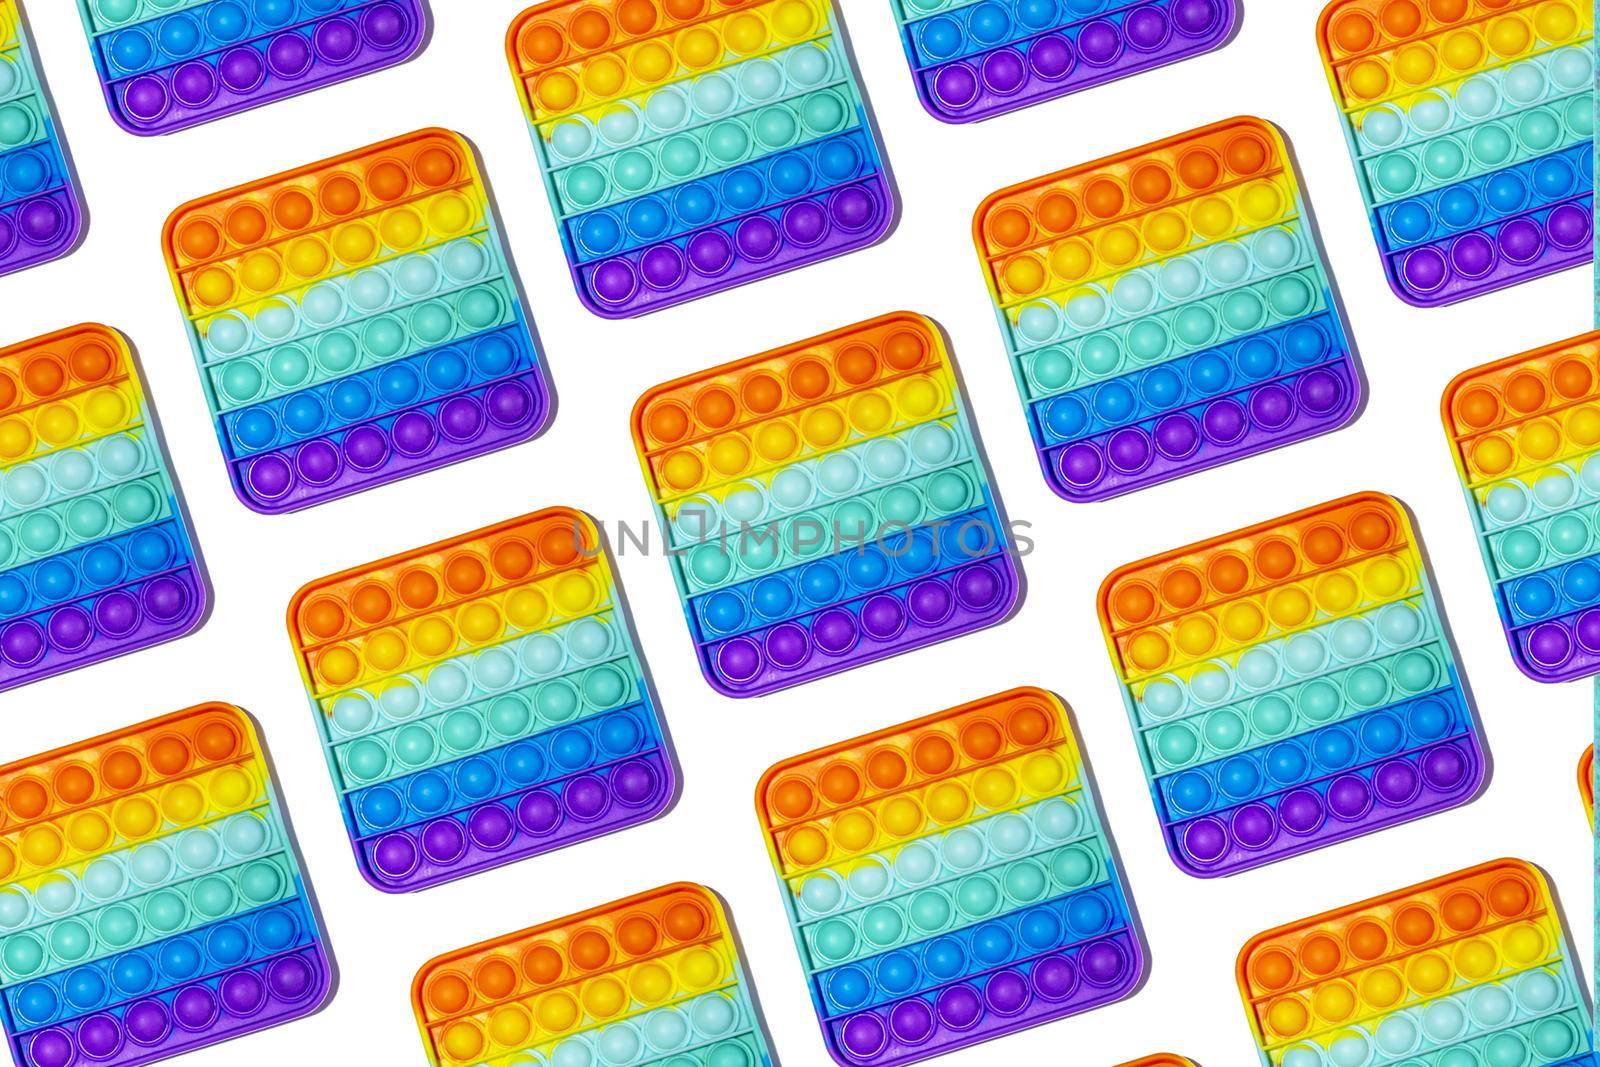 Pattern Colorful pop it toys close up. Isolate on white background. by Essffes